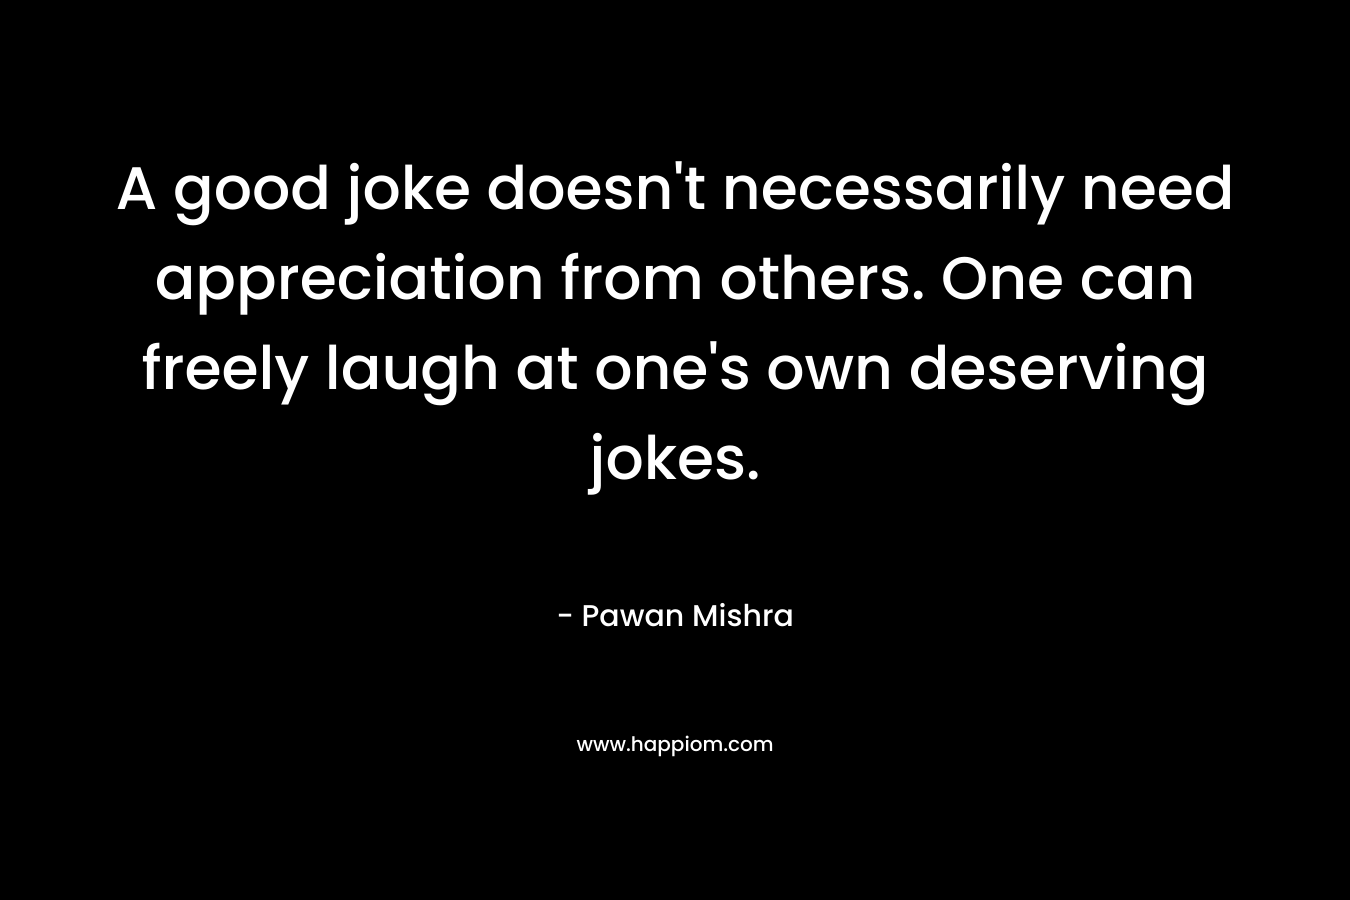 A good joke doesn’t necessarily need appreciation from others. One can freely laugh at one’s own deserving jokes. – Pawan Mishra